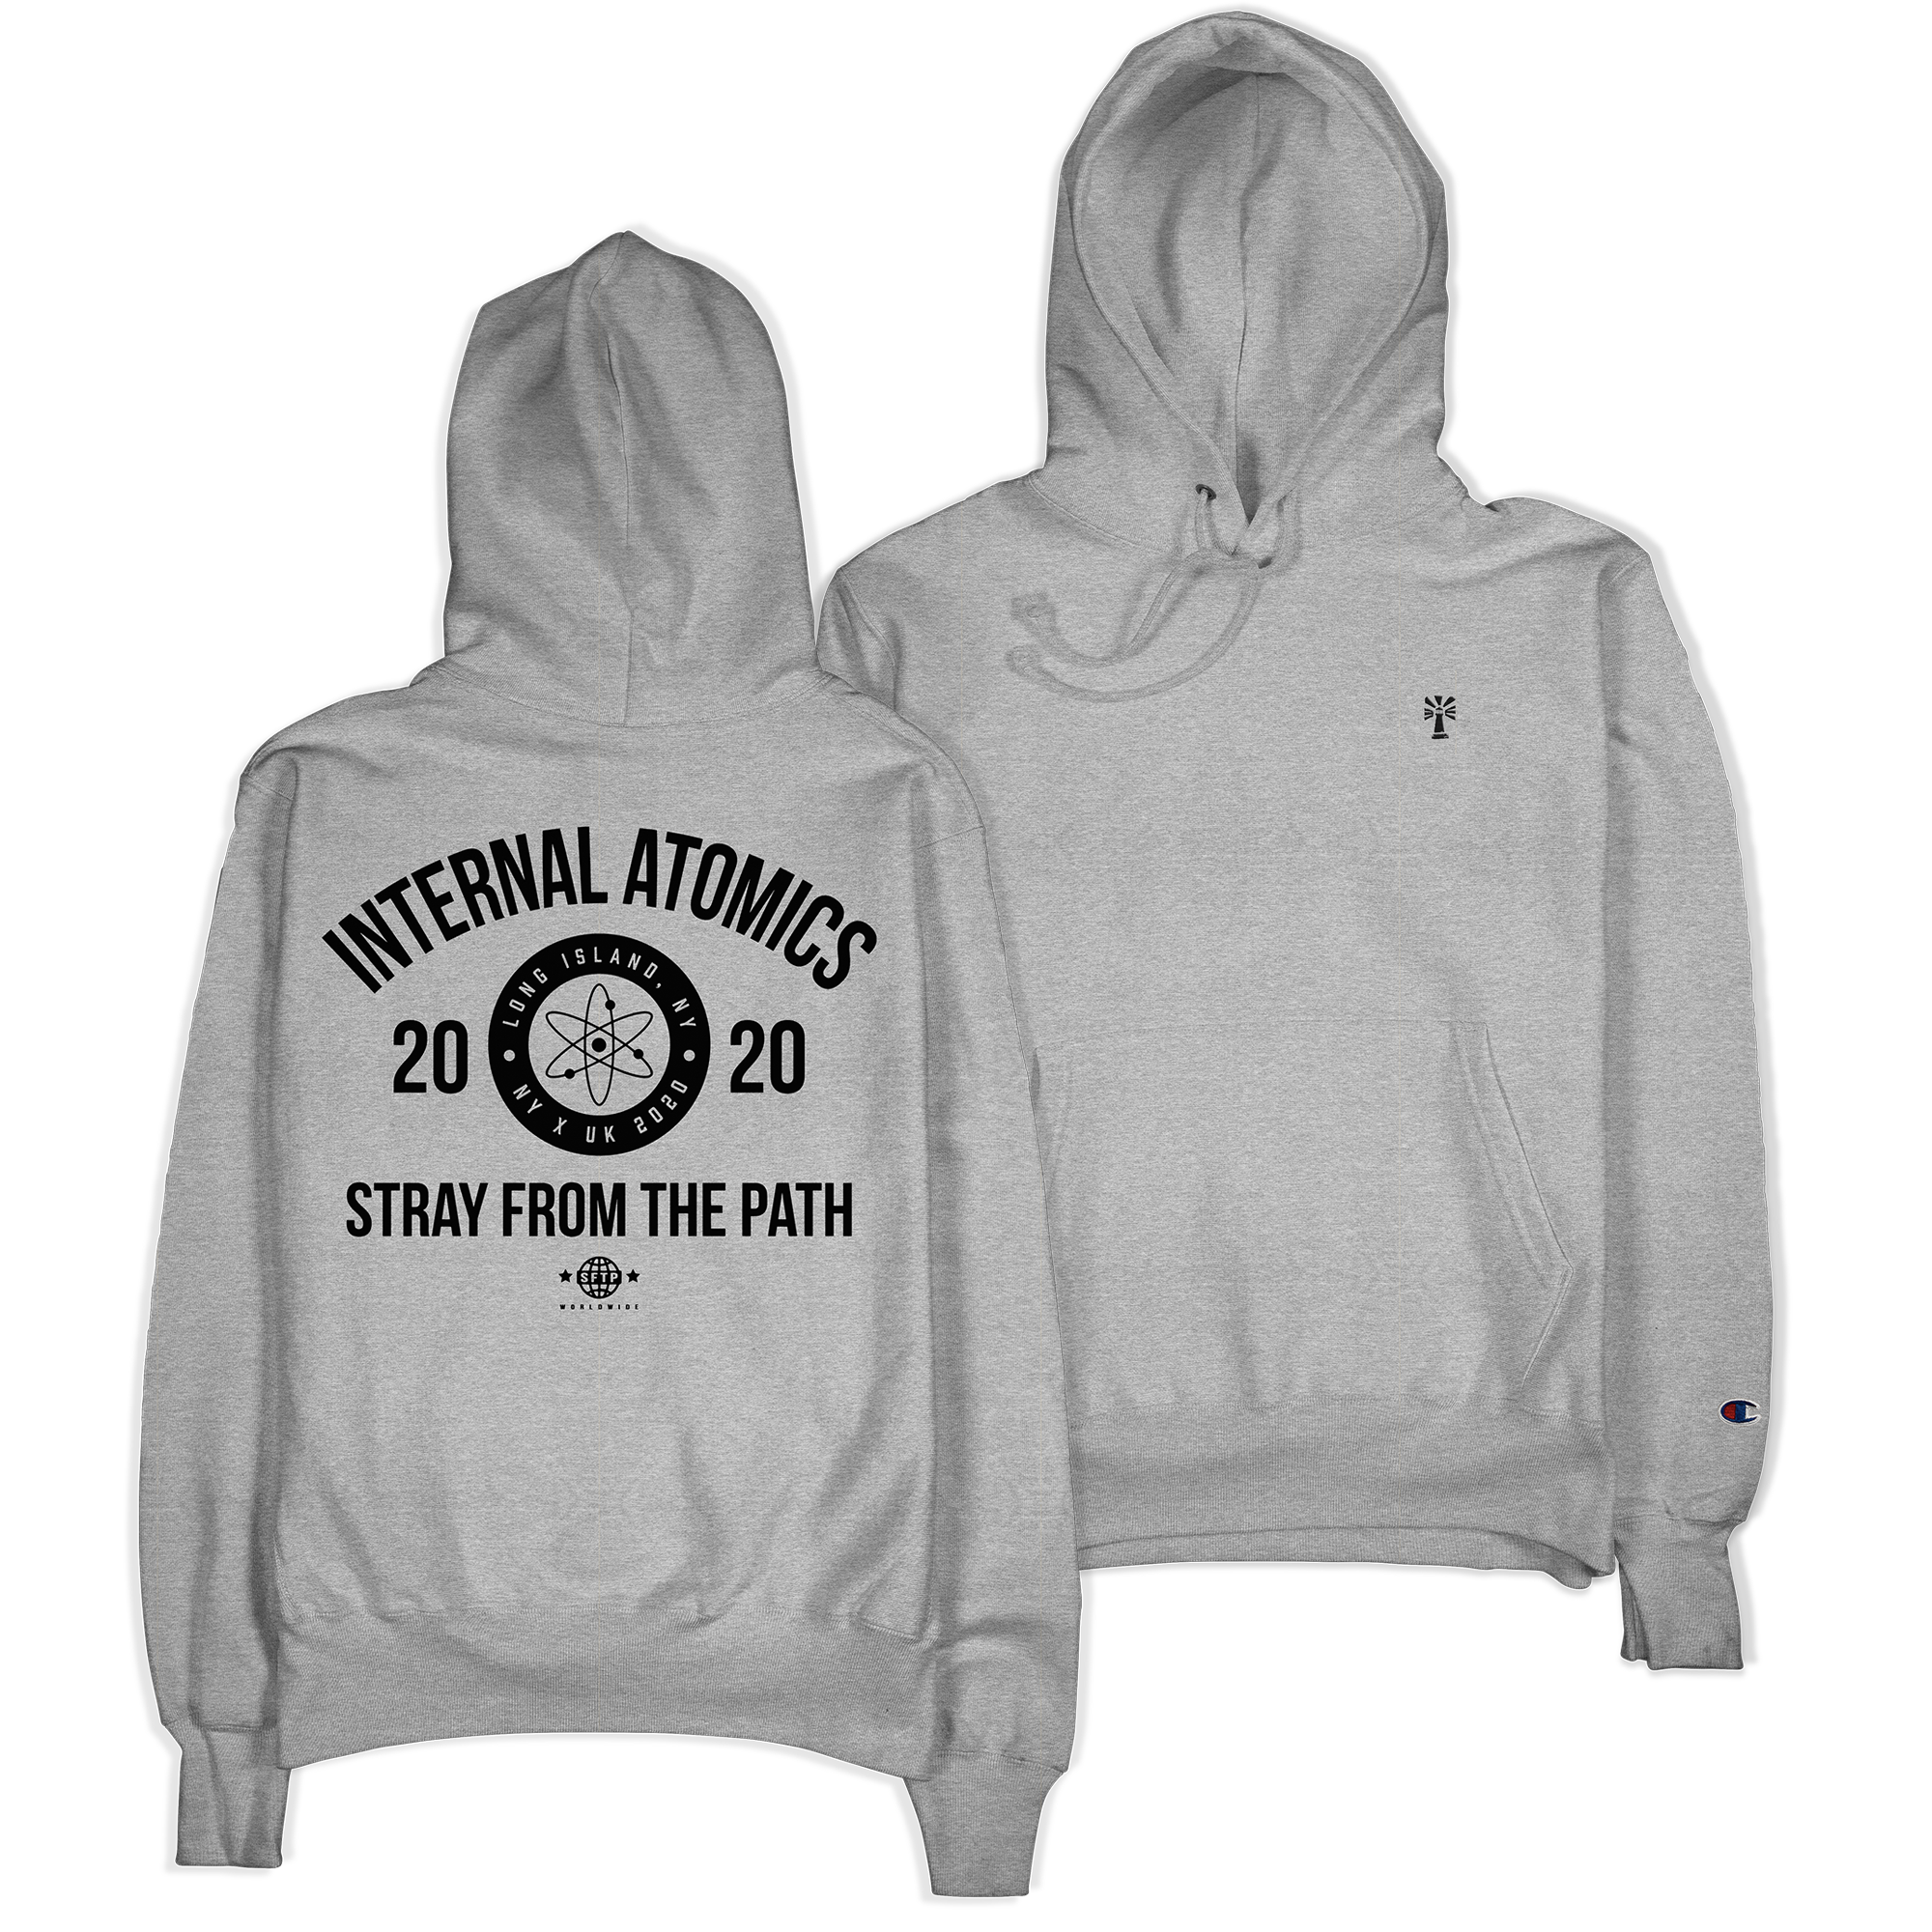 Stray From The Path - Internal Atomics Champion Hoodie (Steel Gray)